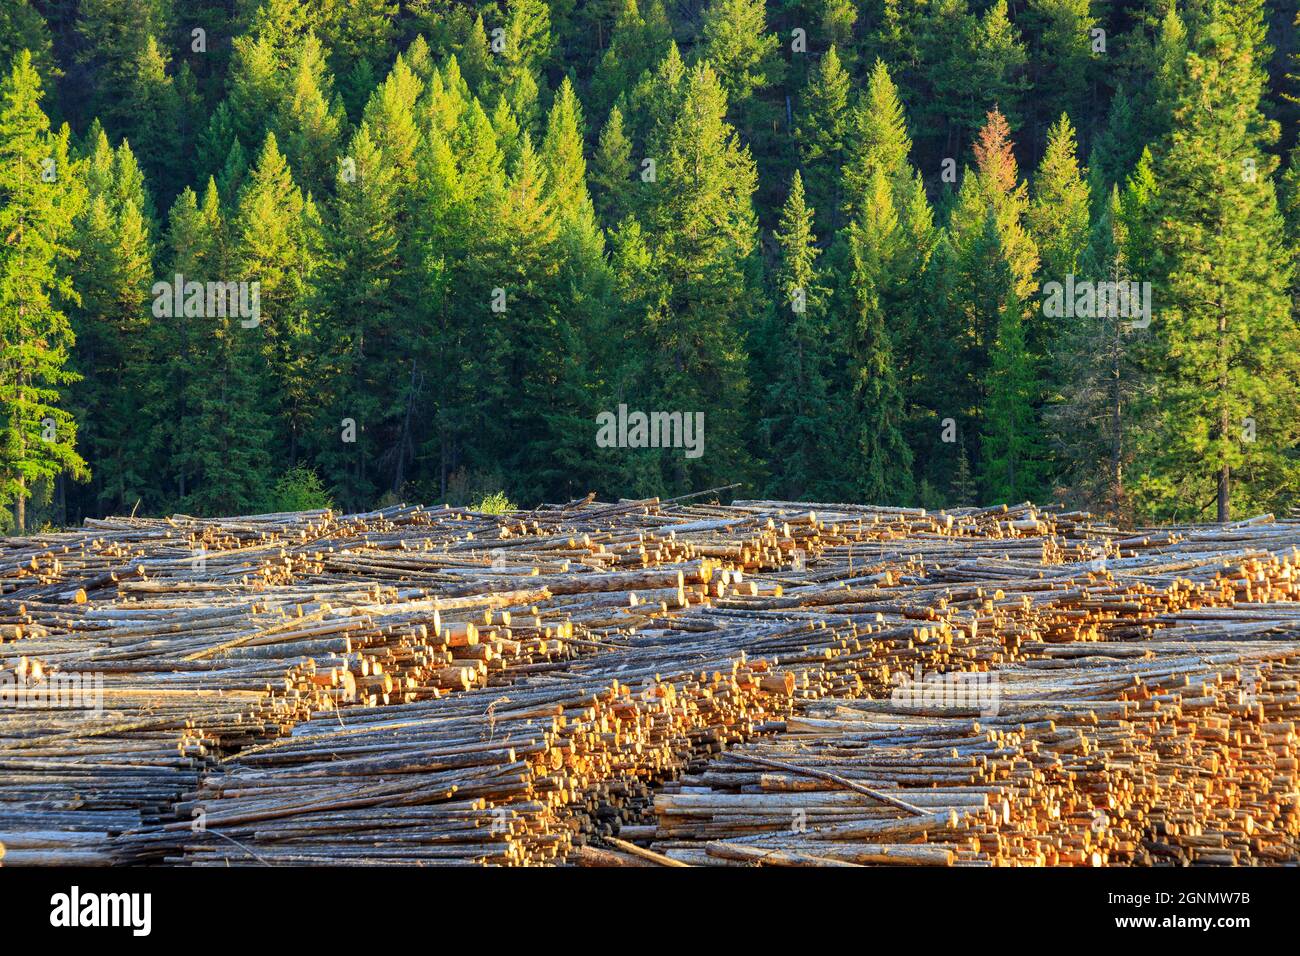 Felled cut wood timber logs in a pile at a sawmill in Midway, British Columbia, Canada. The lumber logging industry is a very important business for t Stock Photo